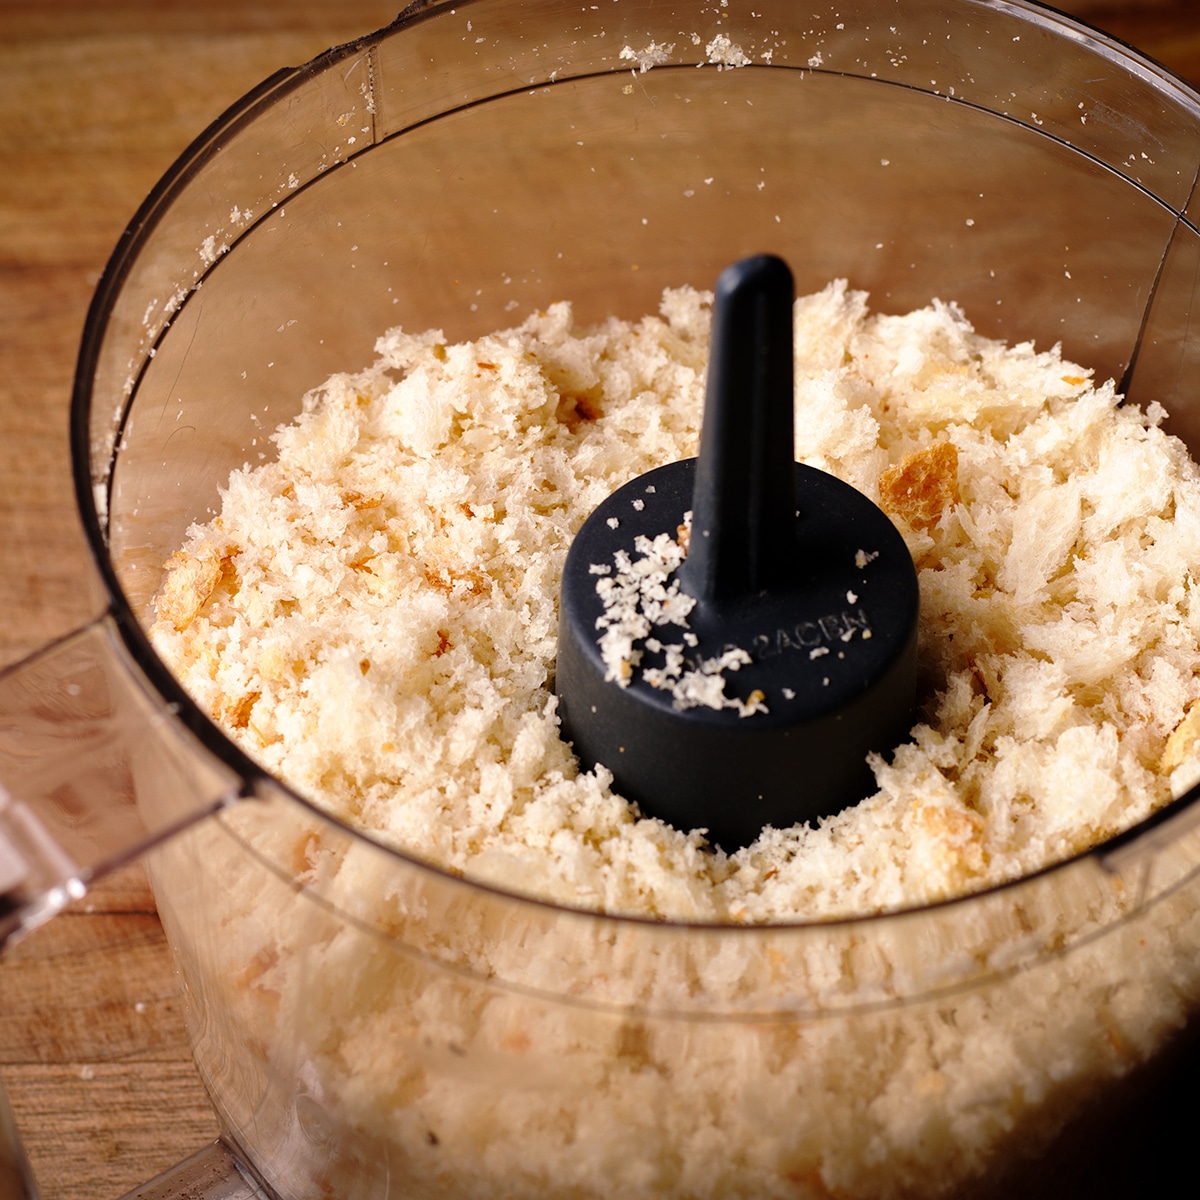 Pulsing slices of bread and garlic in a food processor to make fresh bread crumbs.